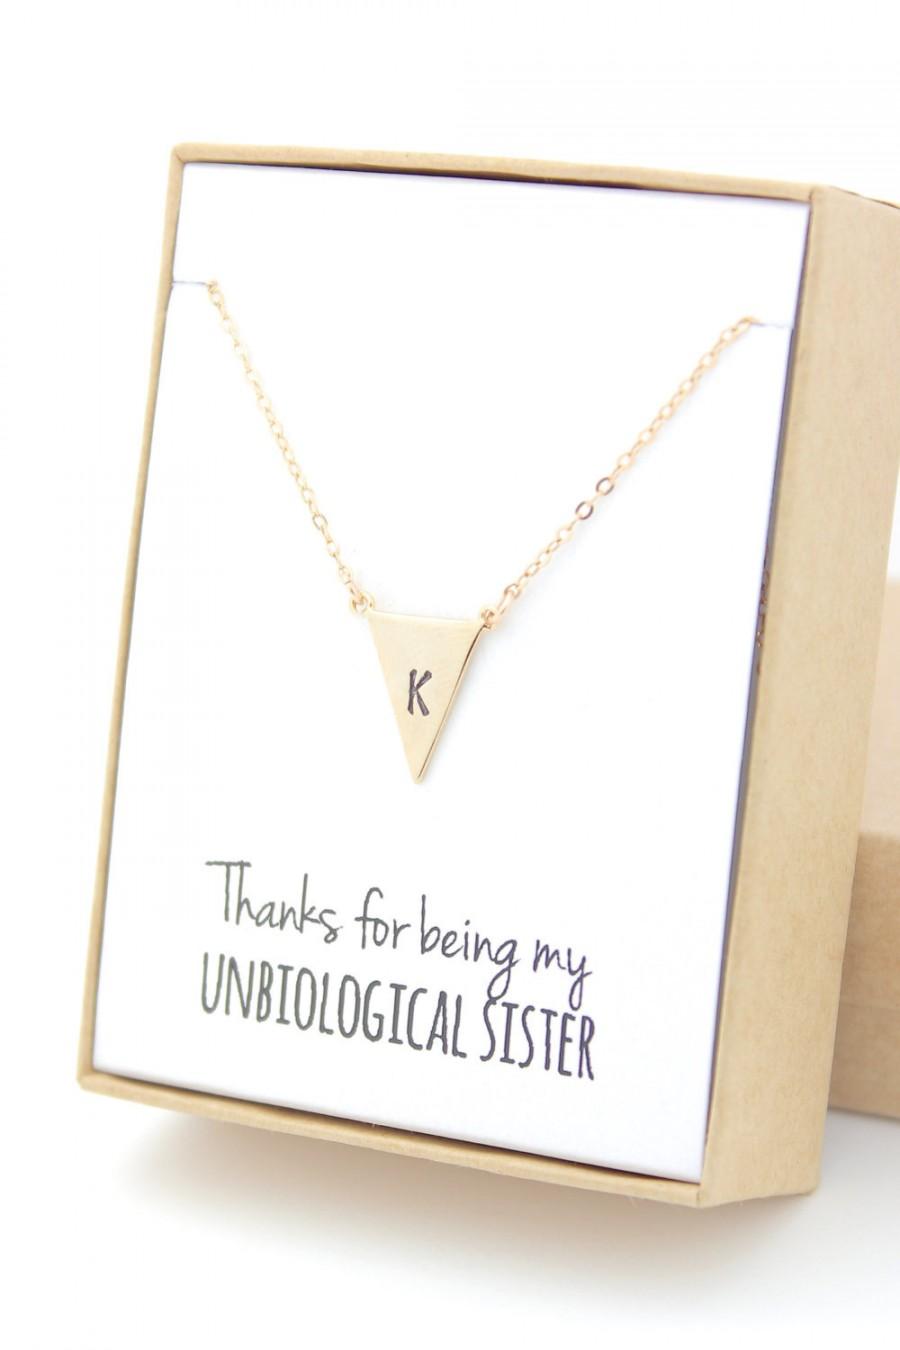 Hochzeit - Gold Triangle Letter Necklace - Bridesmaid Gift Jewelry - Unbiological Sister - Personalized Necklace - Initial Letter - Larger Triangle